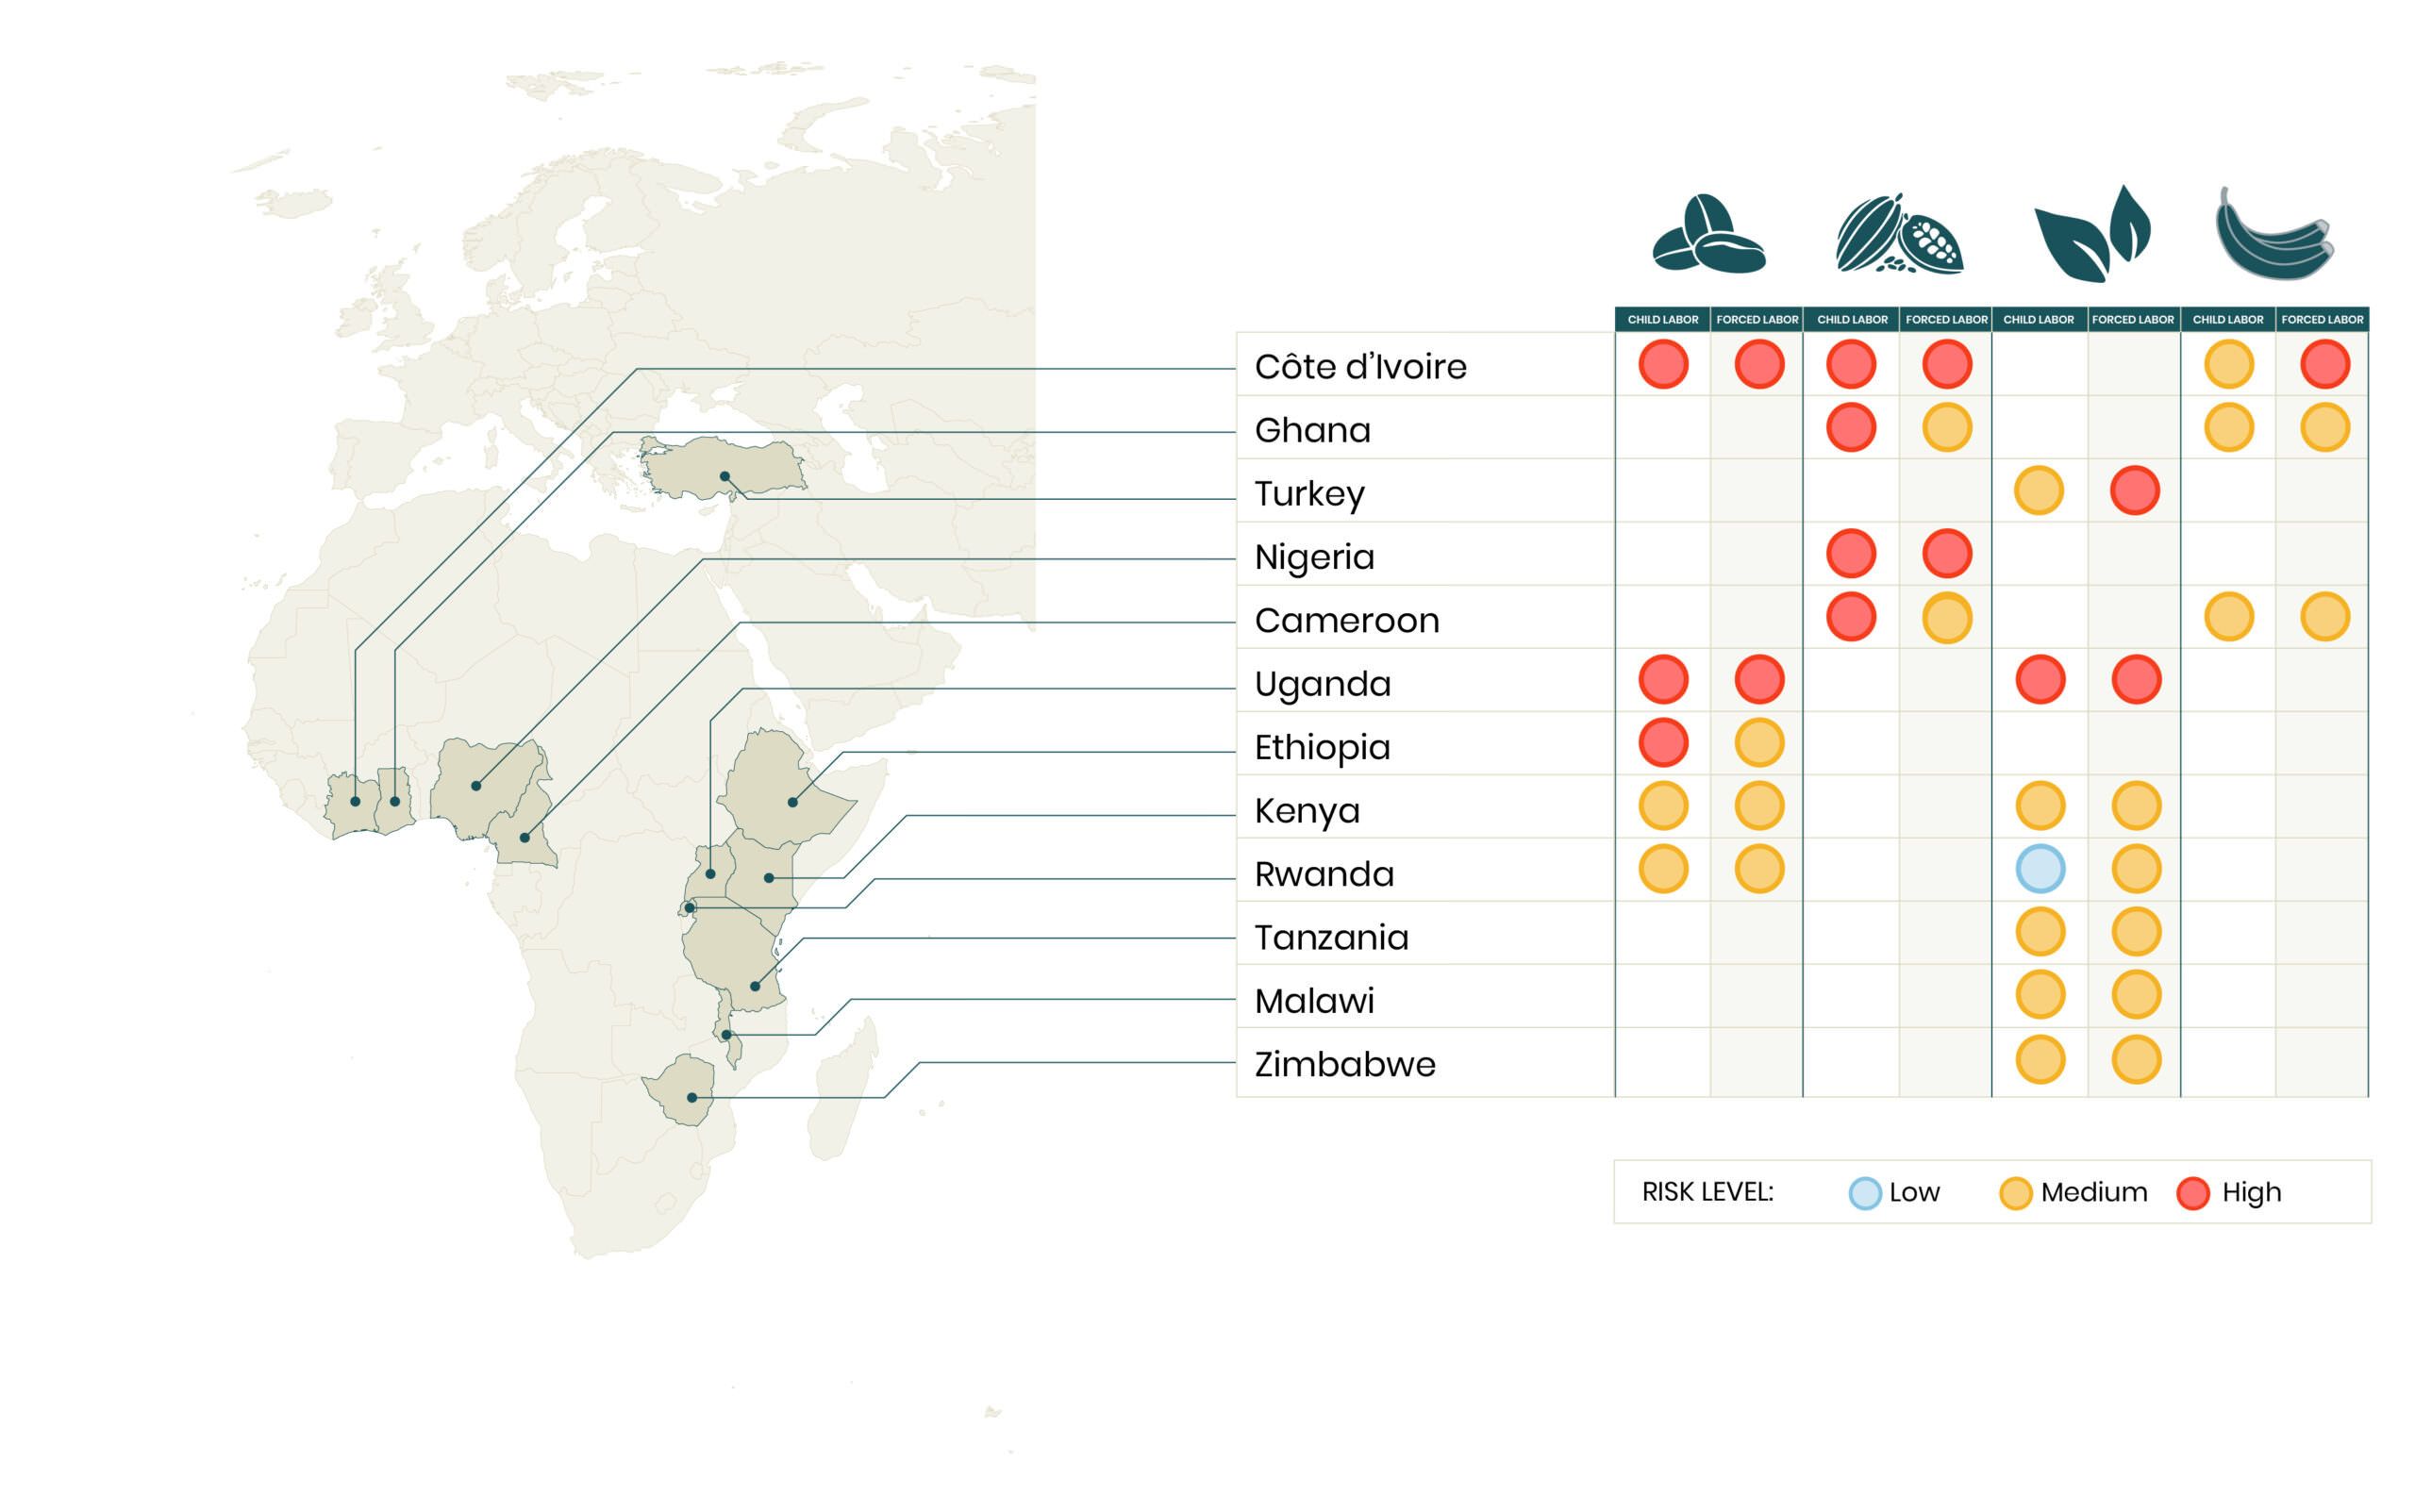 Risk map for child labor and forced labor in Africa